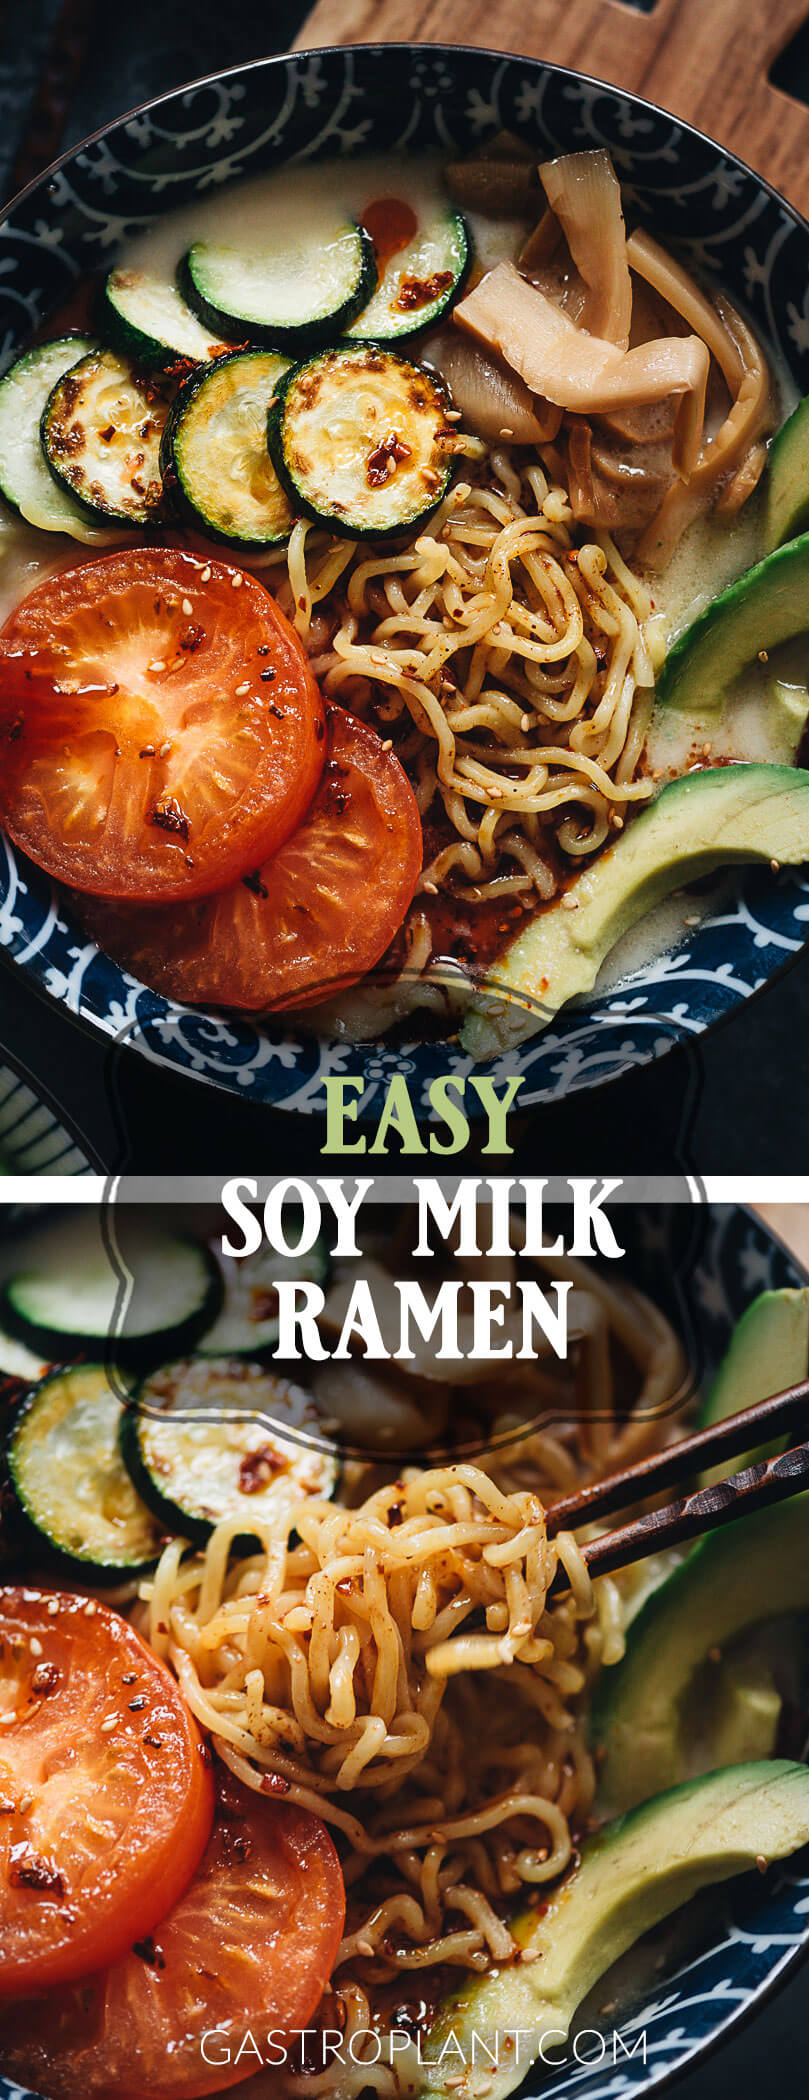 Easy Homemade Ramen Noodle Soup with Soy Milk Broth (Vegan)